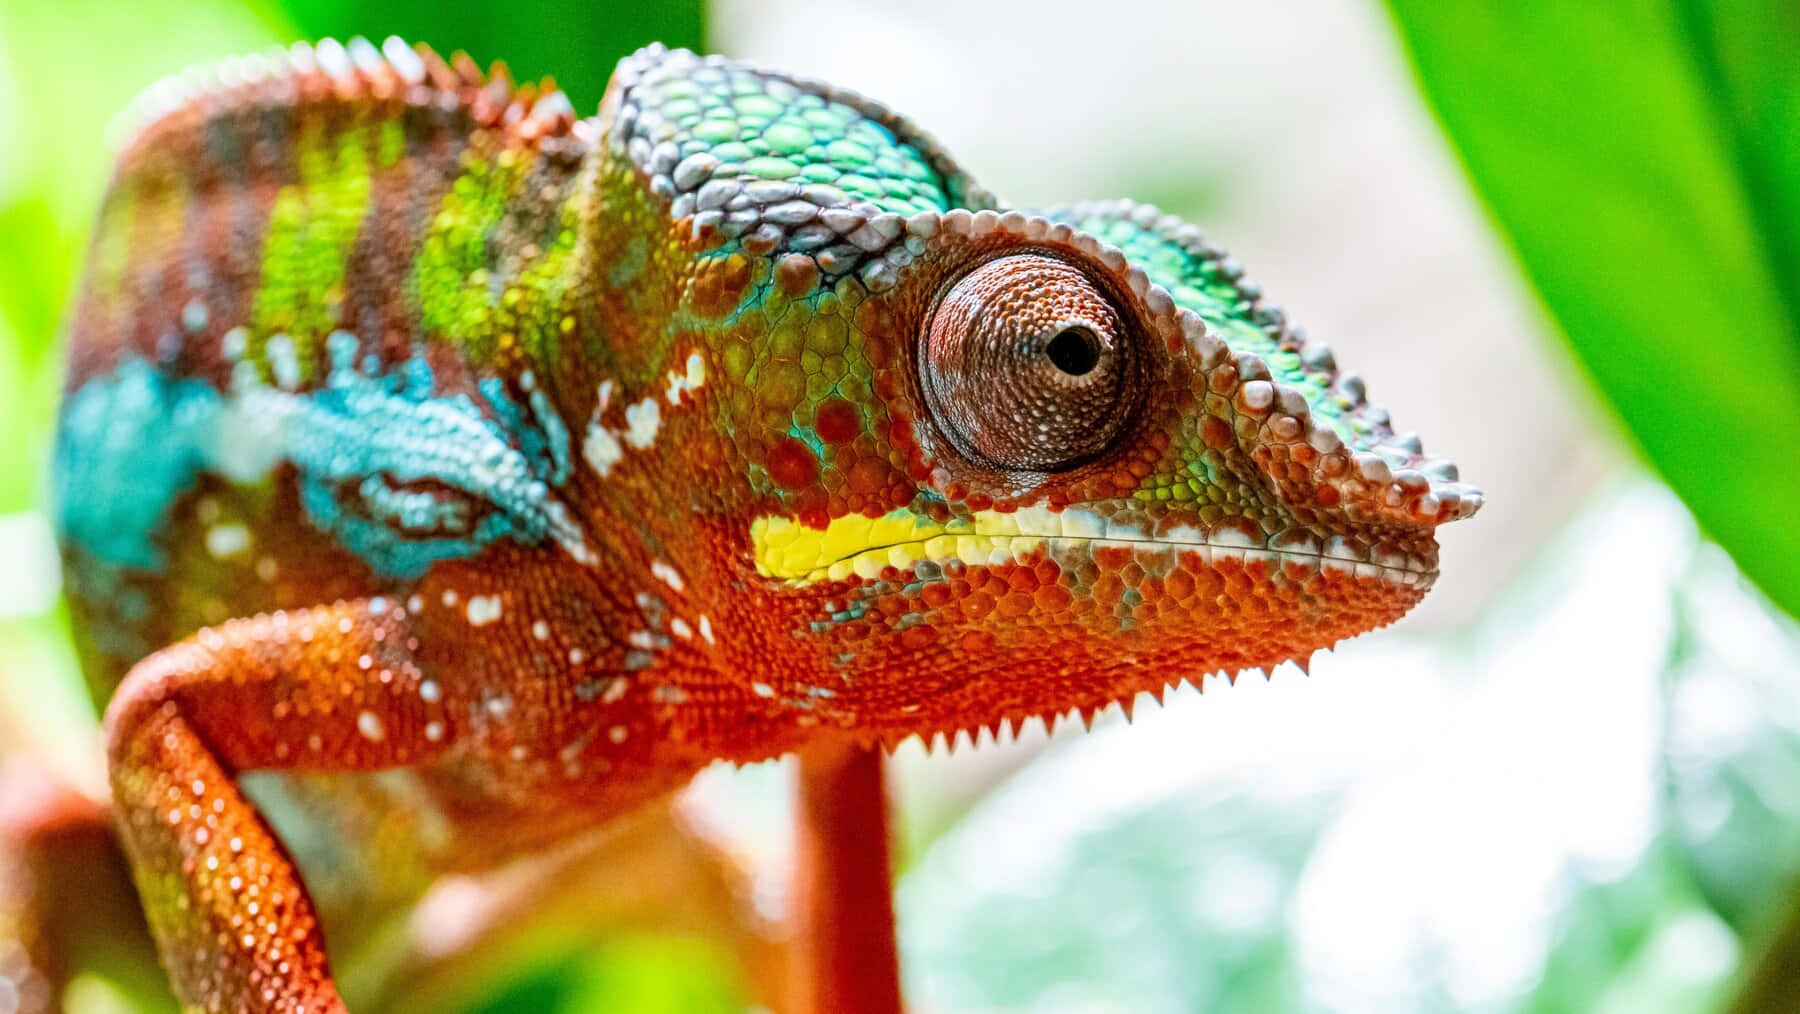 An intently curious chameleon